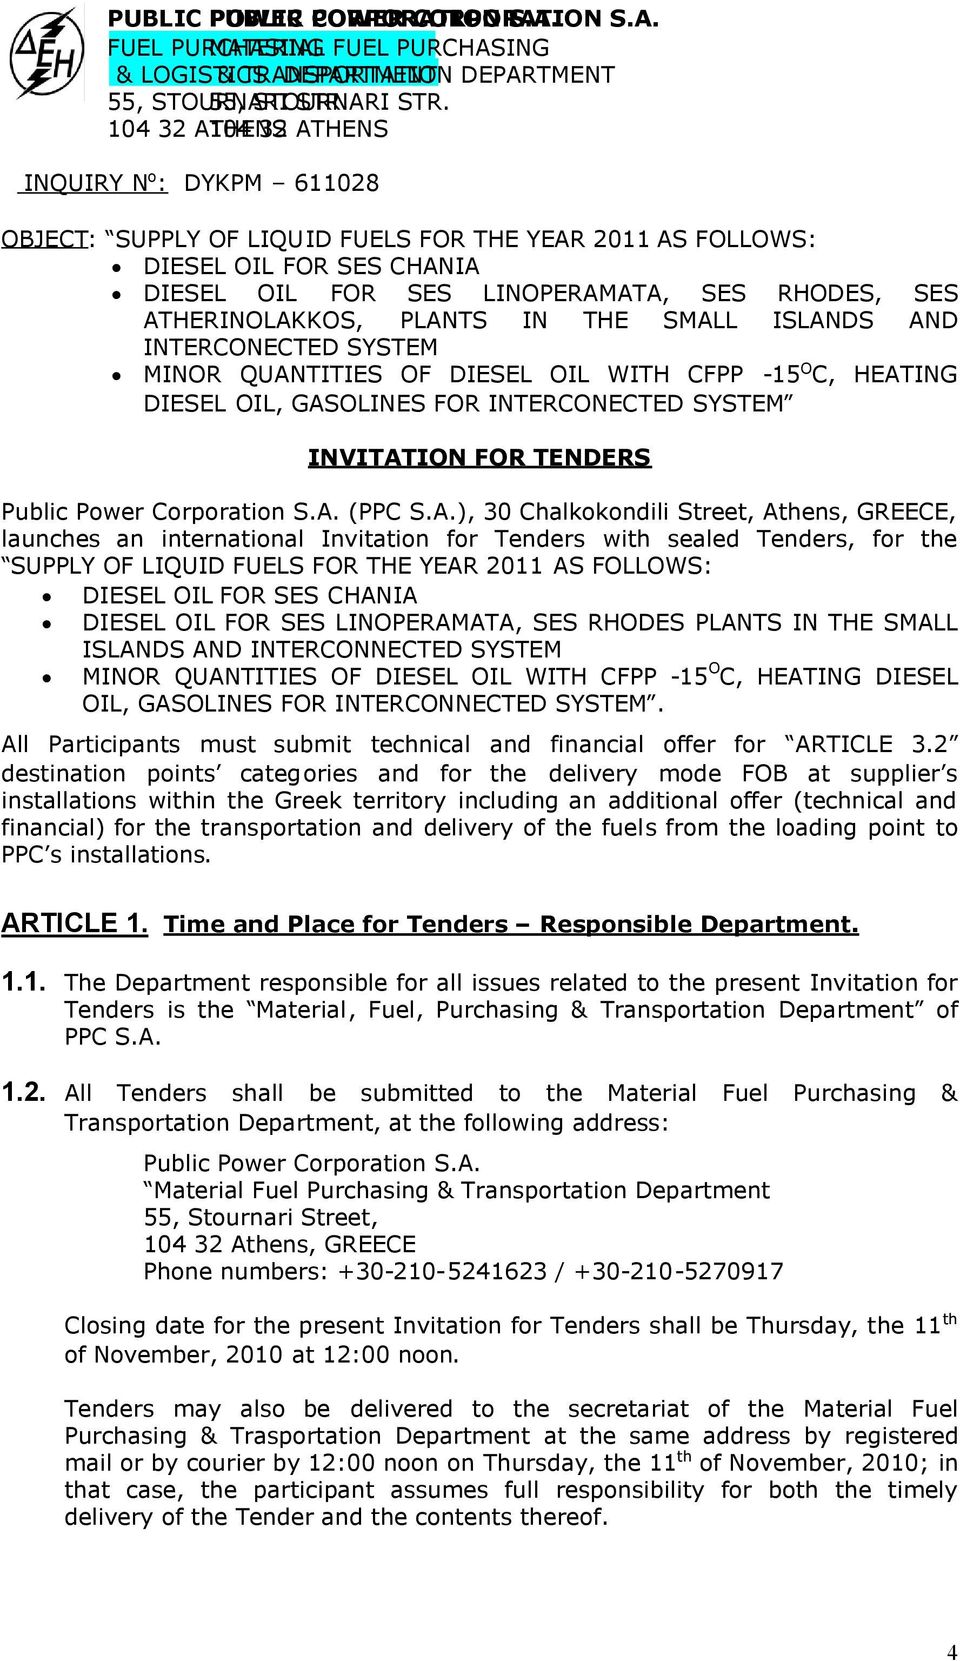 ATHERINOLAKKOS, PLANTS IN THE SMALL ISLANDS AND INTERCONECTED SYSTEM MINOR QUANTITIES OF DIESEL OIL WITH CFPP -15 O C, HEATING DIESEL OIL, GASOLINES FOR INTERCONECTED SYSTEM INVITATION FOR TENDERS